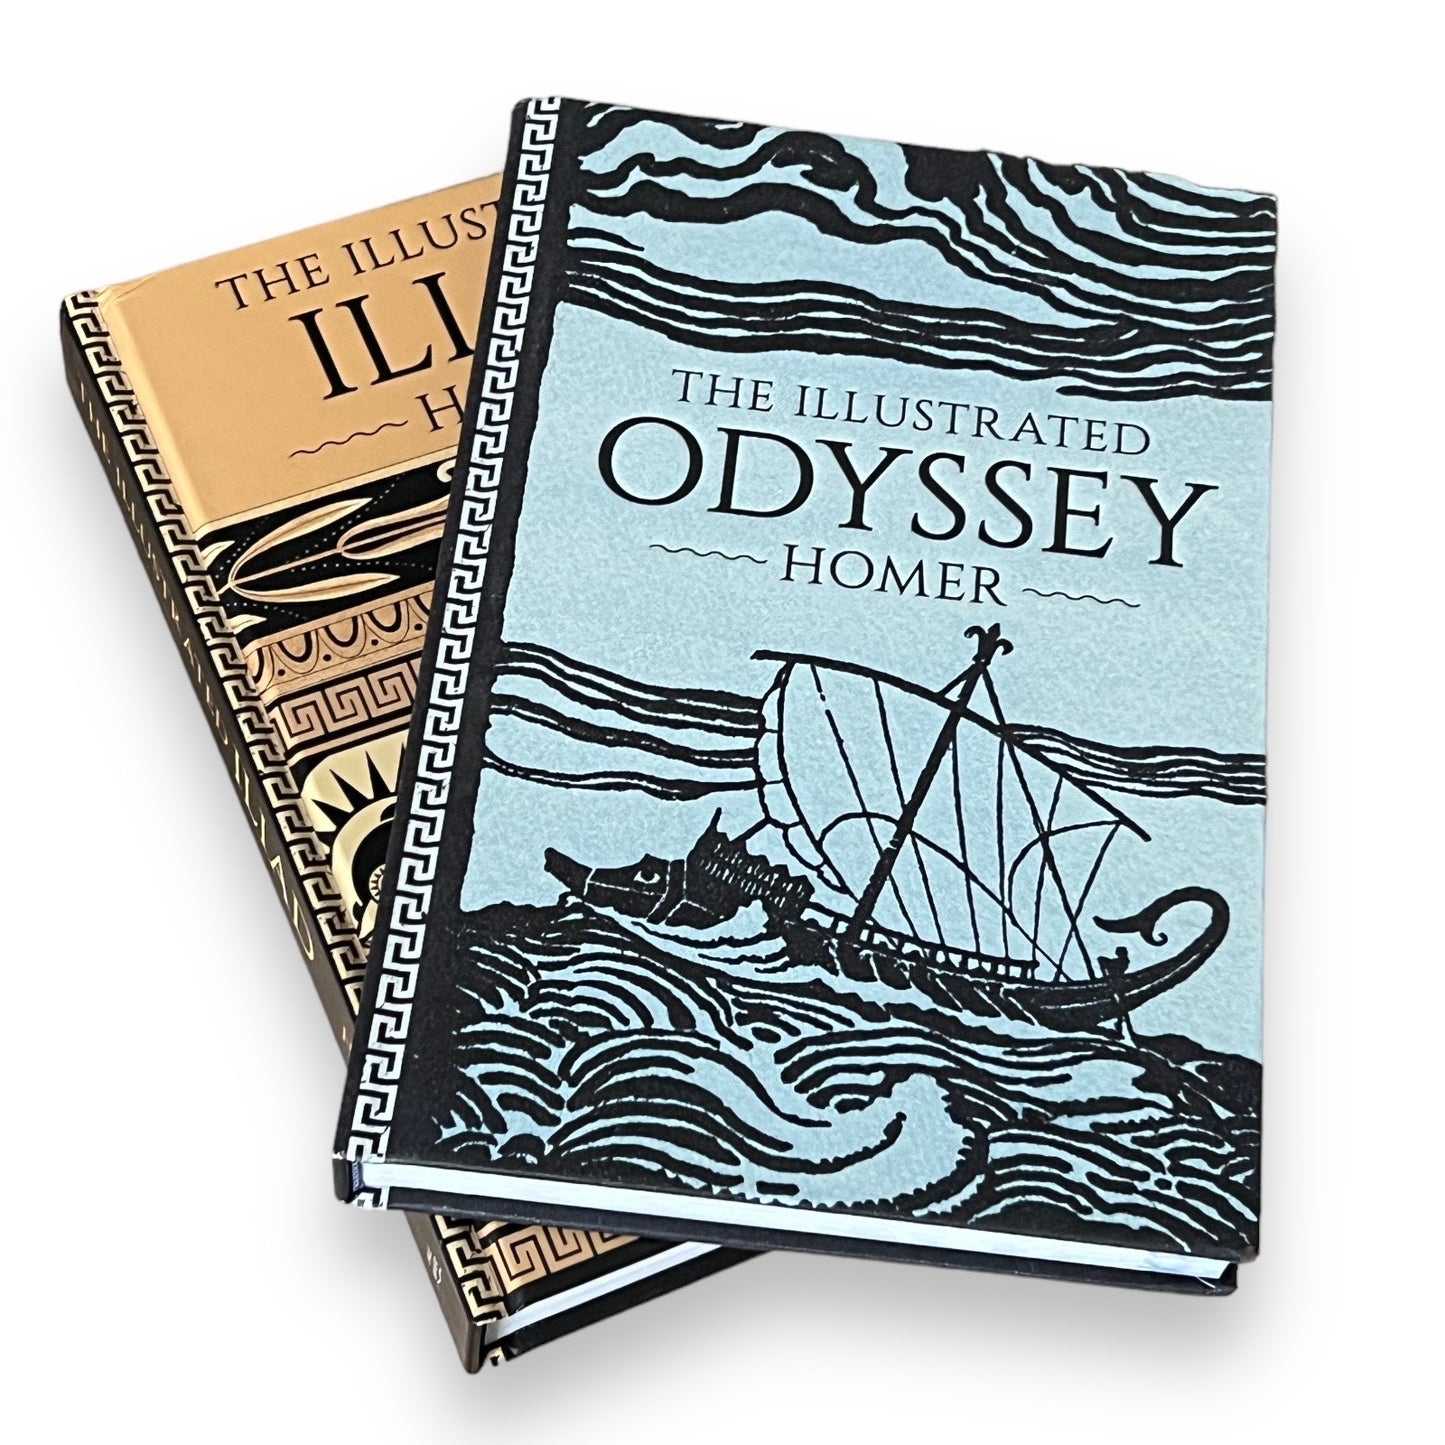 2 Books: The Illustrated ILIAD & ODYSSEY by HOMER - Collectible Deluxe Special Gift Edition - Hardcover - Classics Rare Find